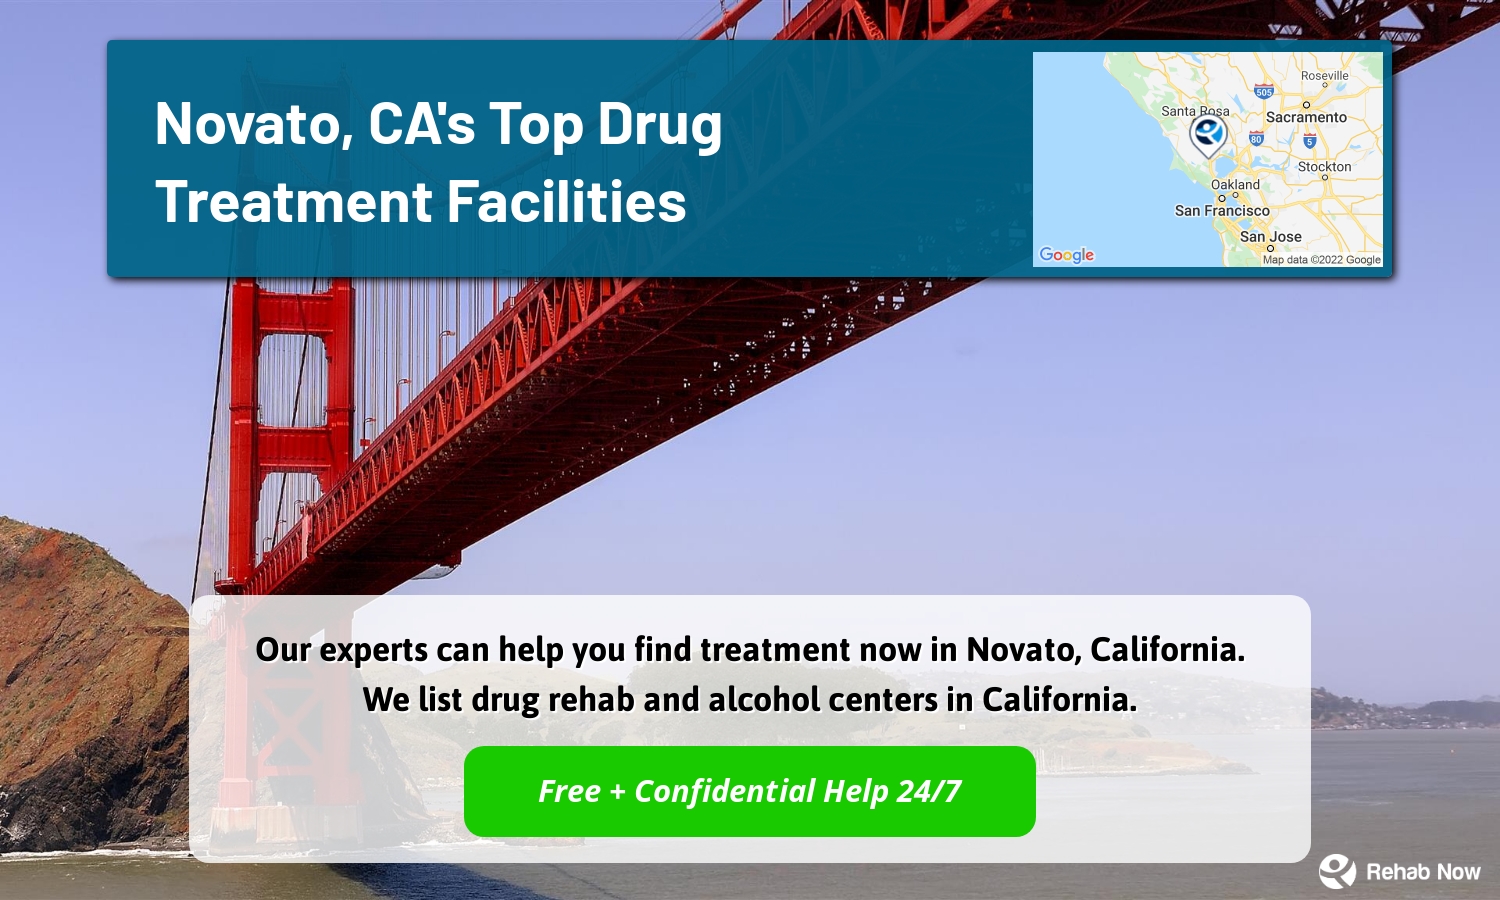 Our experts can help you find treatment now in Novato, California. We list drug rehab and alcohol centers in California.